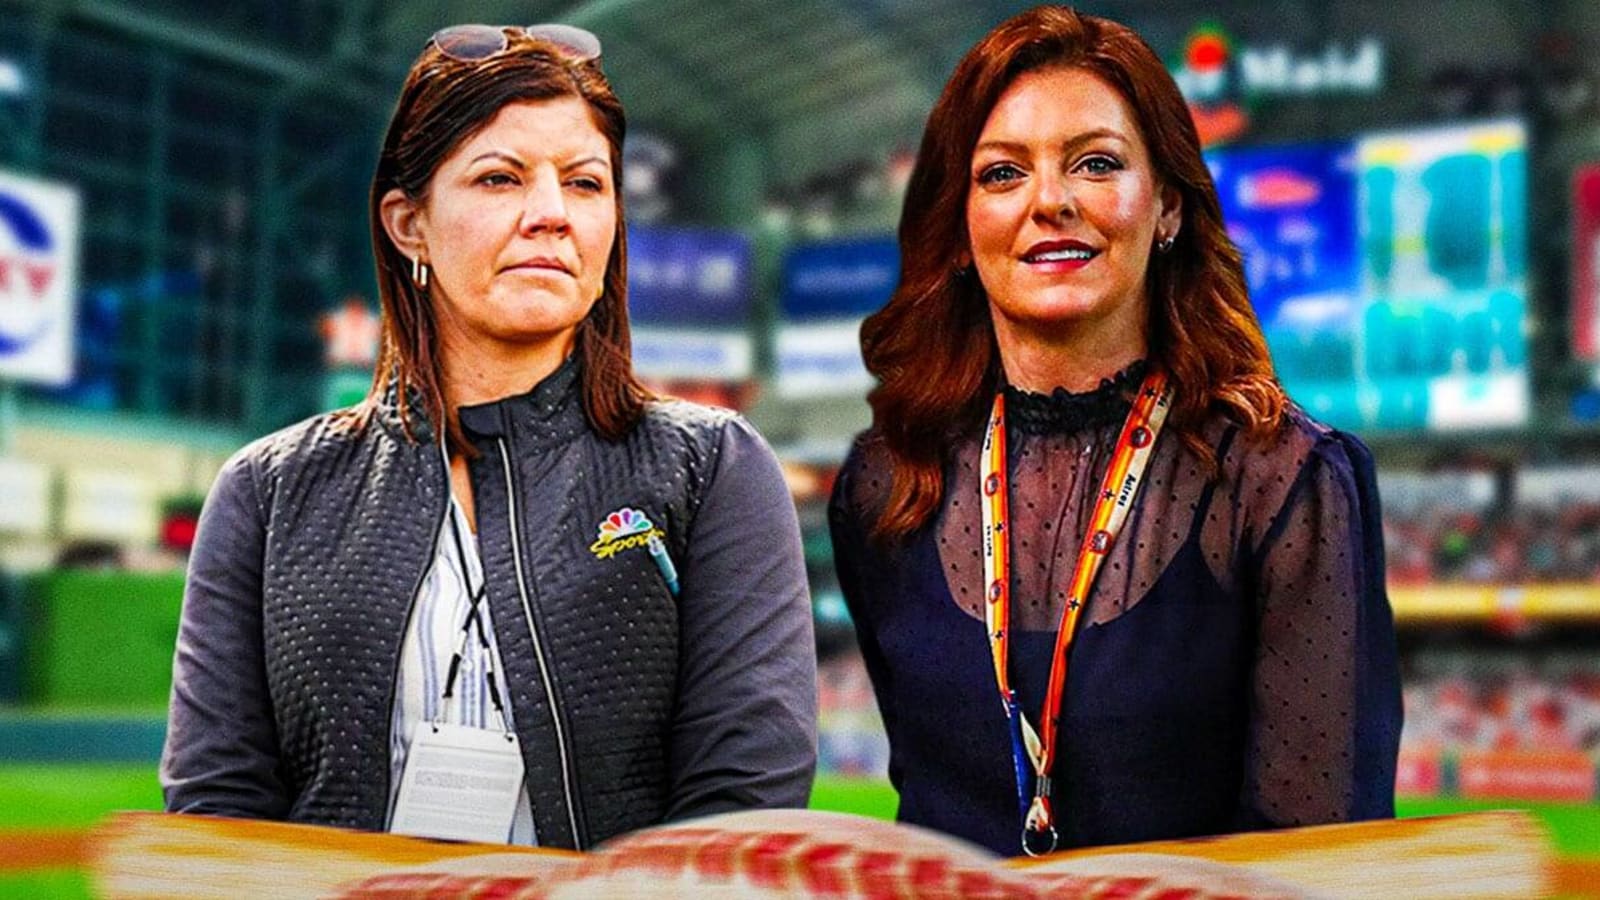 Astros, Athletics make history with female announcers